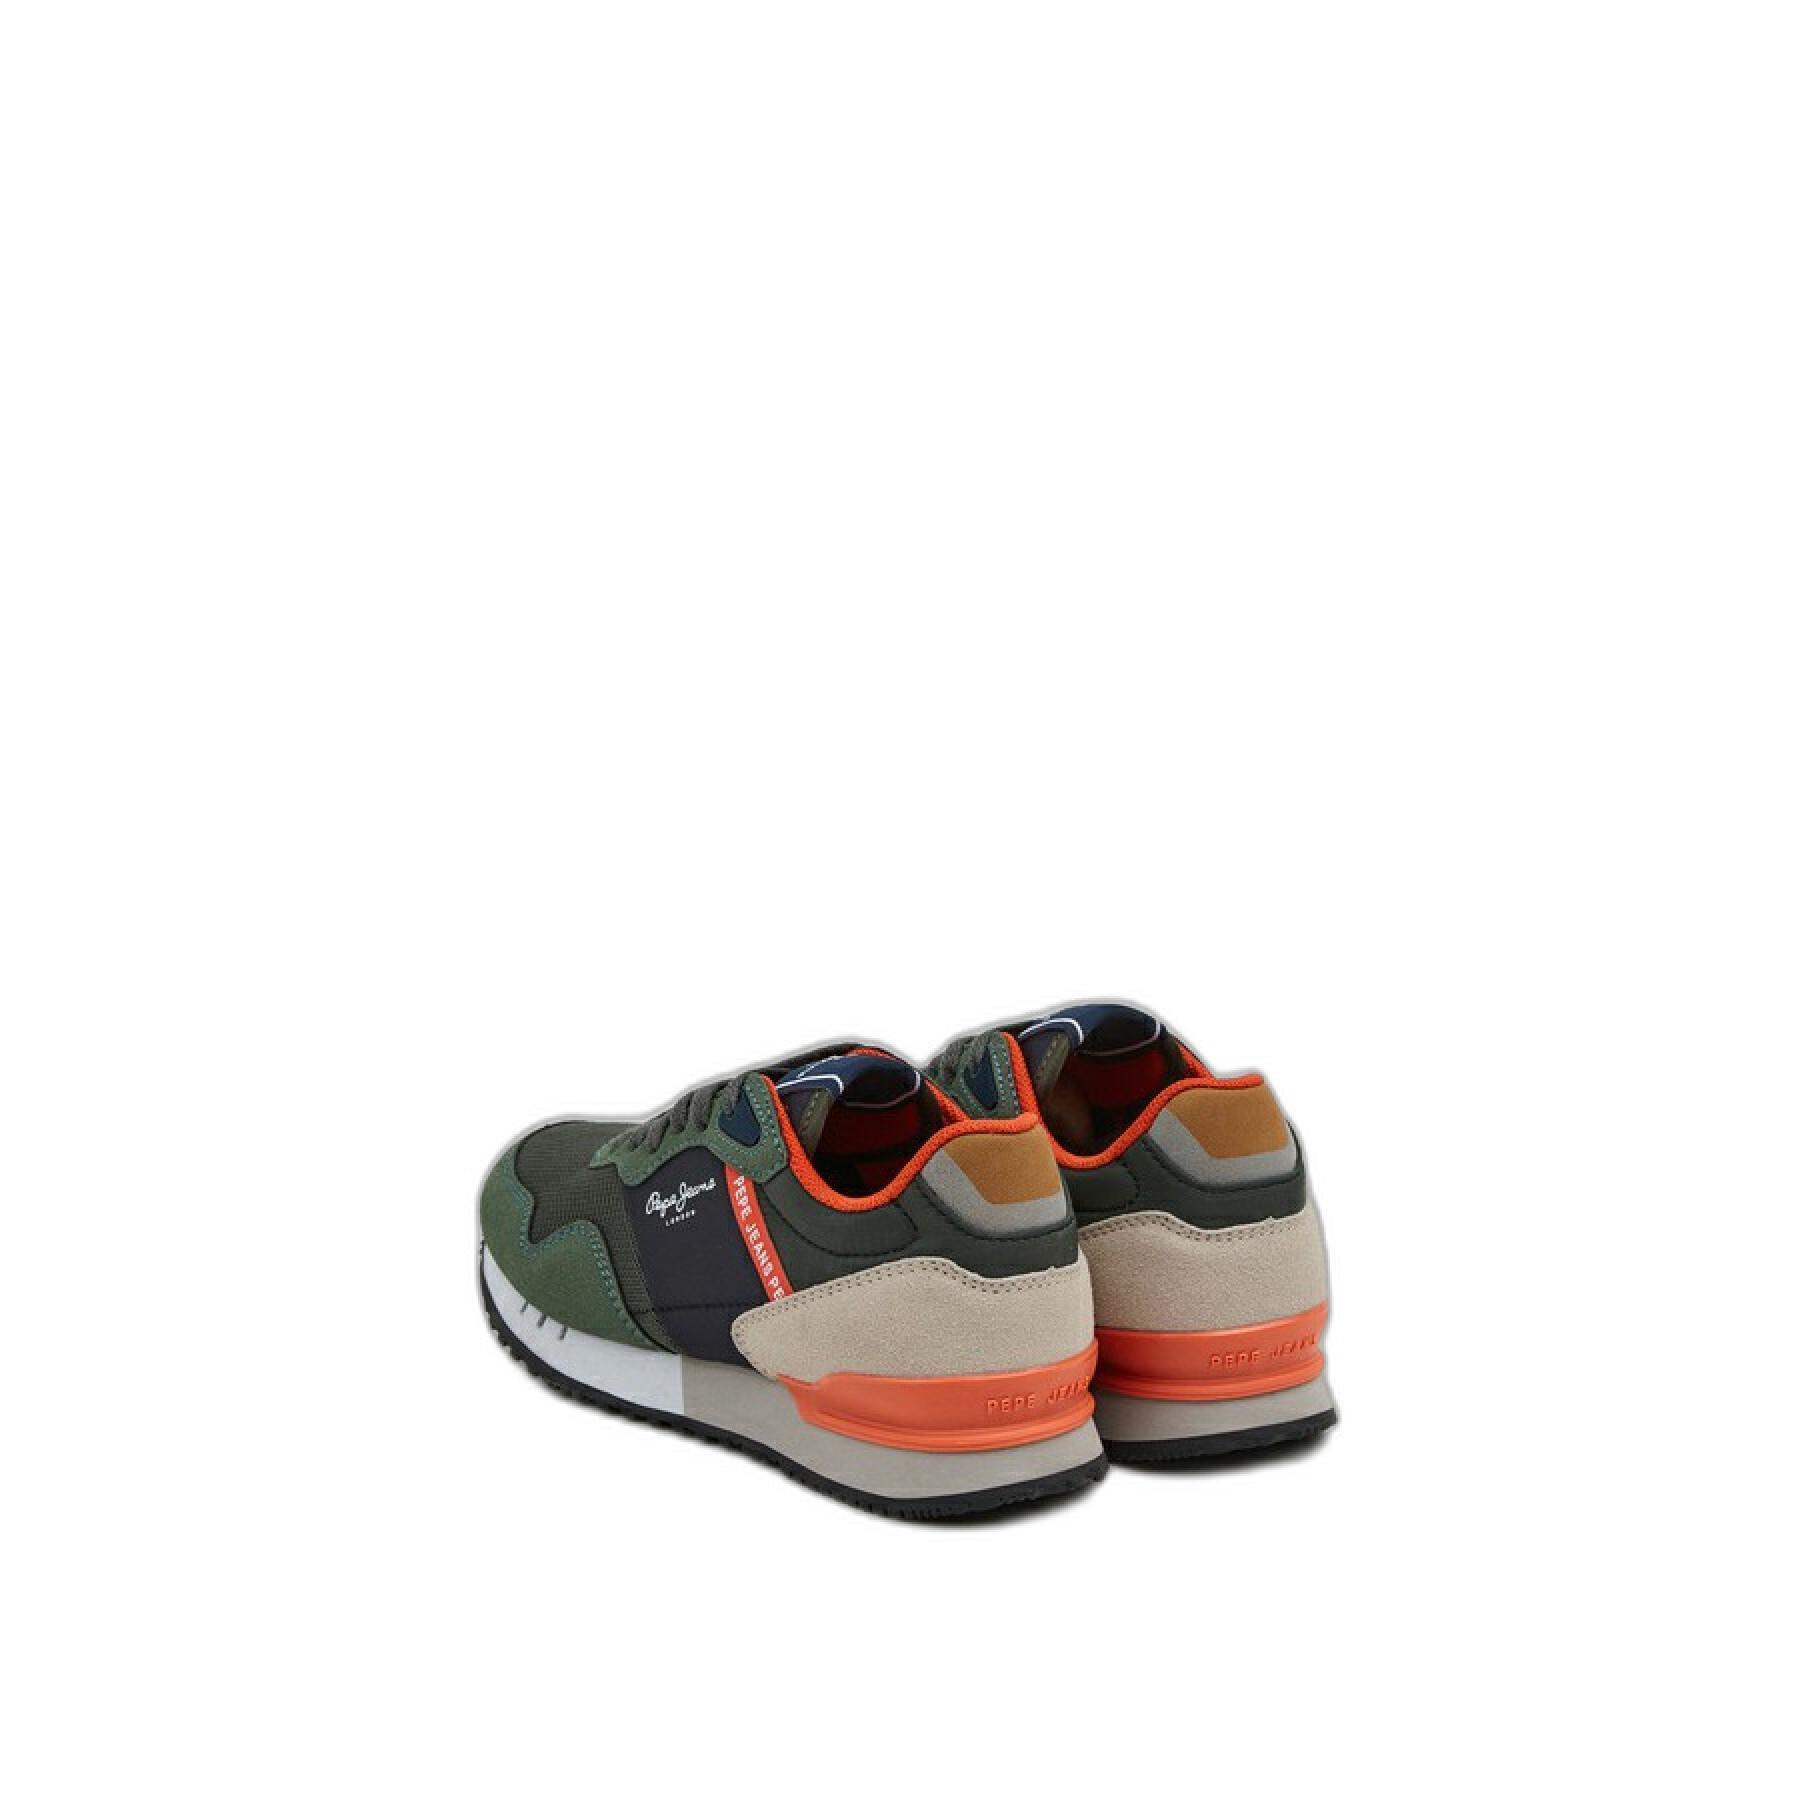 Children's sneakers Pepe Jeans London One Basic